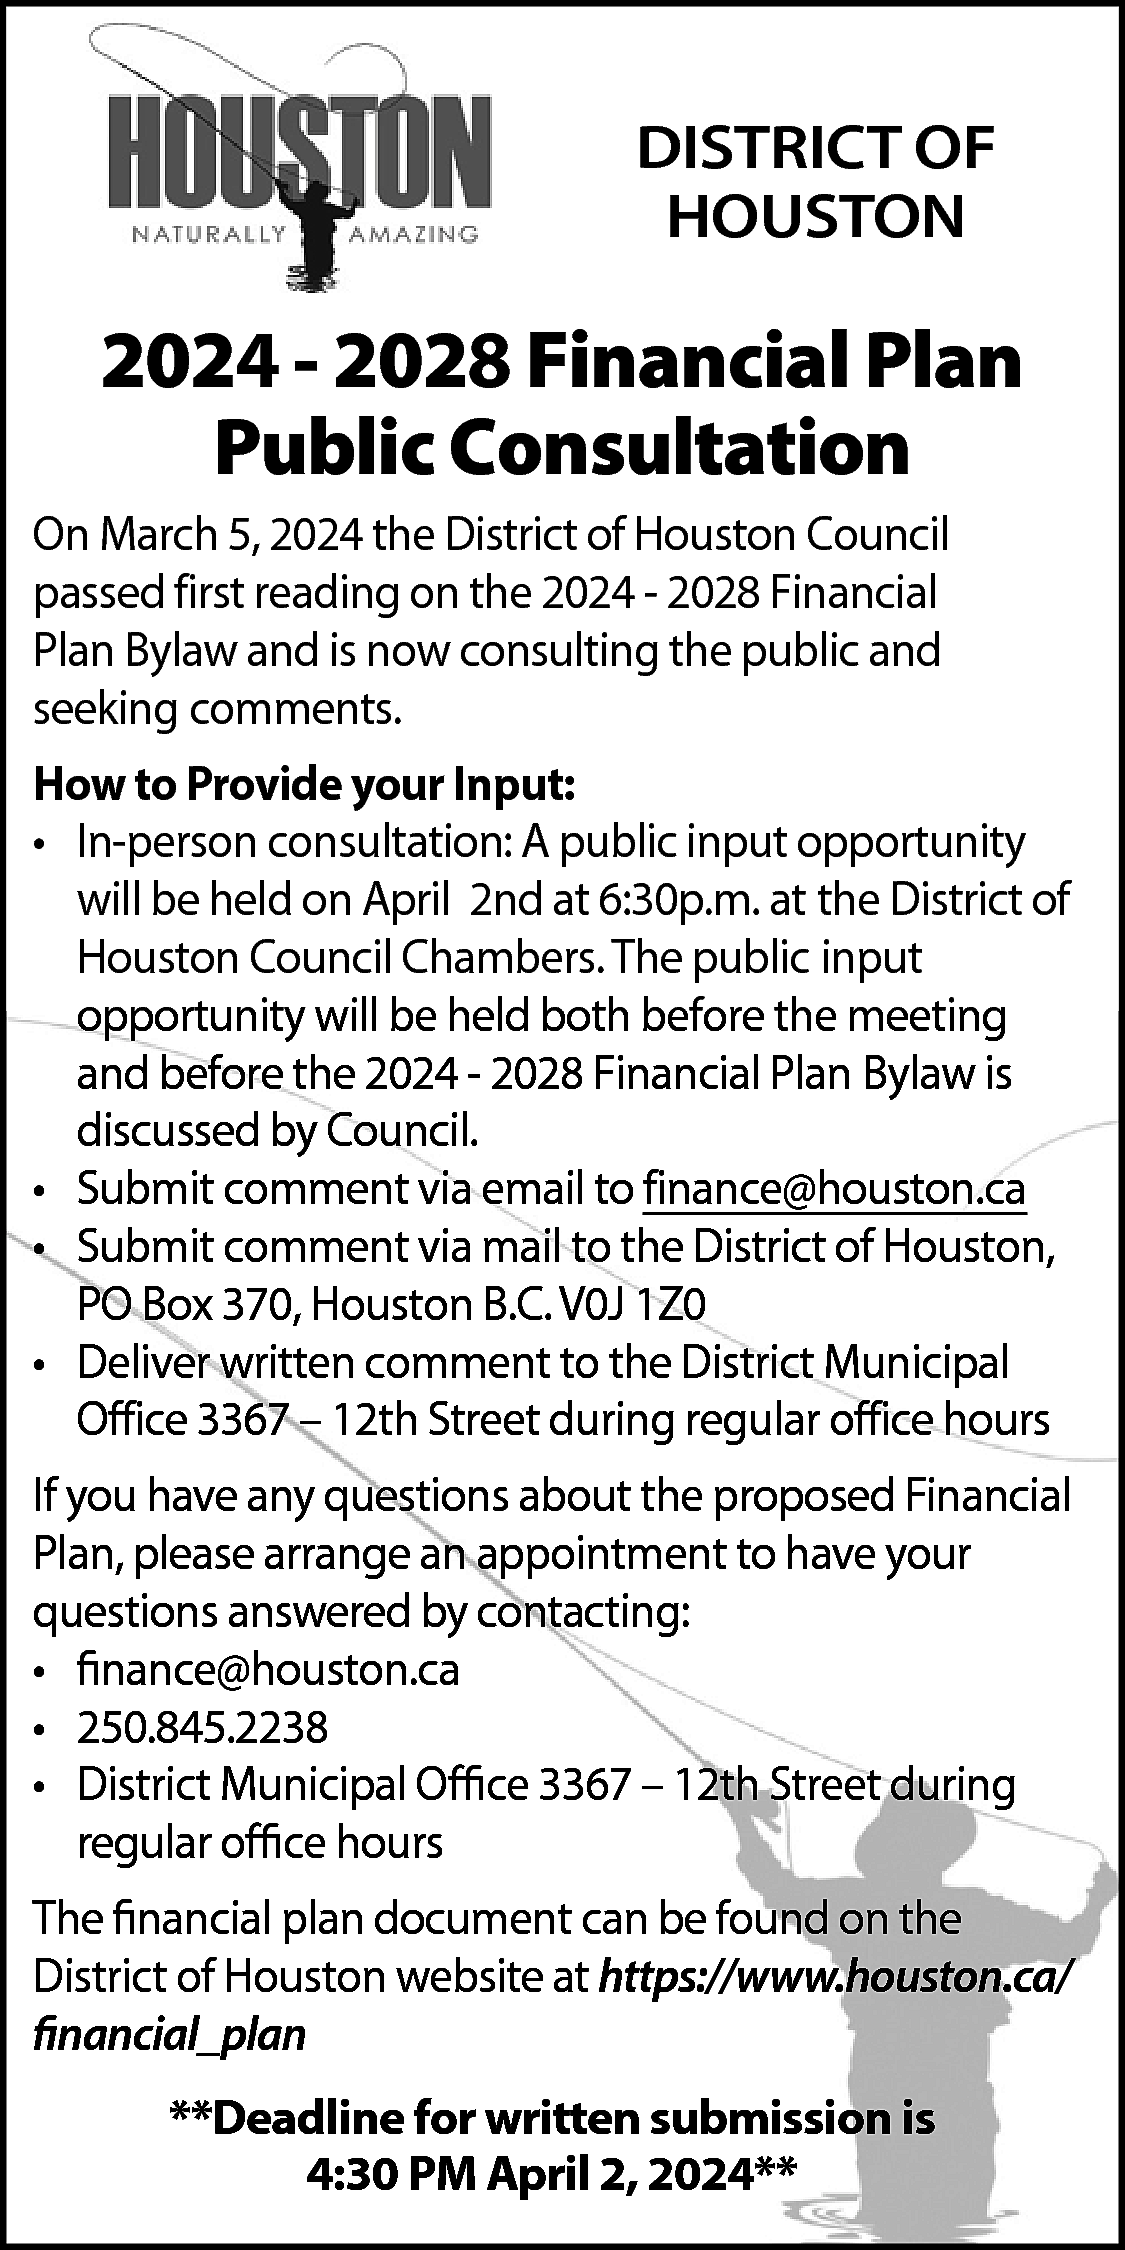 DISTRICT OF <br>HOUSTON <br> <br>2024  DISTRICT OF  HOUSTON    2024 - 2028 Financial Plan  Public Consultation    On March 5, 2024 the District of Houston Council  passed first reading on the 2024 - 2028 Financial  Plan Bylaw and is now consulting the public and  seeking comments.    How to Provide your Input:  • In-person consultation: A public input opportunity  will be held on April 2nd at 6:30p.m. at the District of  Houston Council Chambers. The public input  opportunity will be held both before the meeting  and before the 2024 - 2028 Financial Plan Bylaw is  discussed by Council.  • Submit comment via email to finance@houston.ca  • Submit comment via mail to the District of Houston,  PO Box 370, Houston B.C. V0J 1Z0  • Deliver written comment to the District Municipal  Office 3367 – 12th Street during regular office hours  If you have any questions about the proposed Financial  Plan, please arrange an appointment to have your  questions answered by contacting:  • finance@houston.ca  • 250.845.2238  • District Municipal Office 3367 – 12th Street during  regular office hours  The financial plan document can be found on the  District of Houston website at https://www.houston.ca/  financial_plan  **Deadline for written submission is  4:30 PM April 2, 2024**    